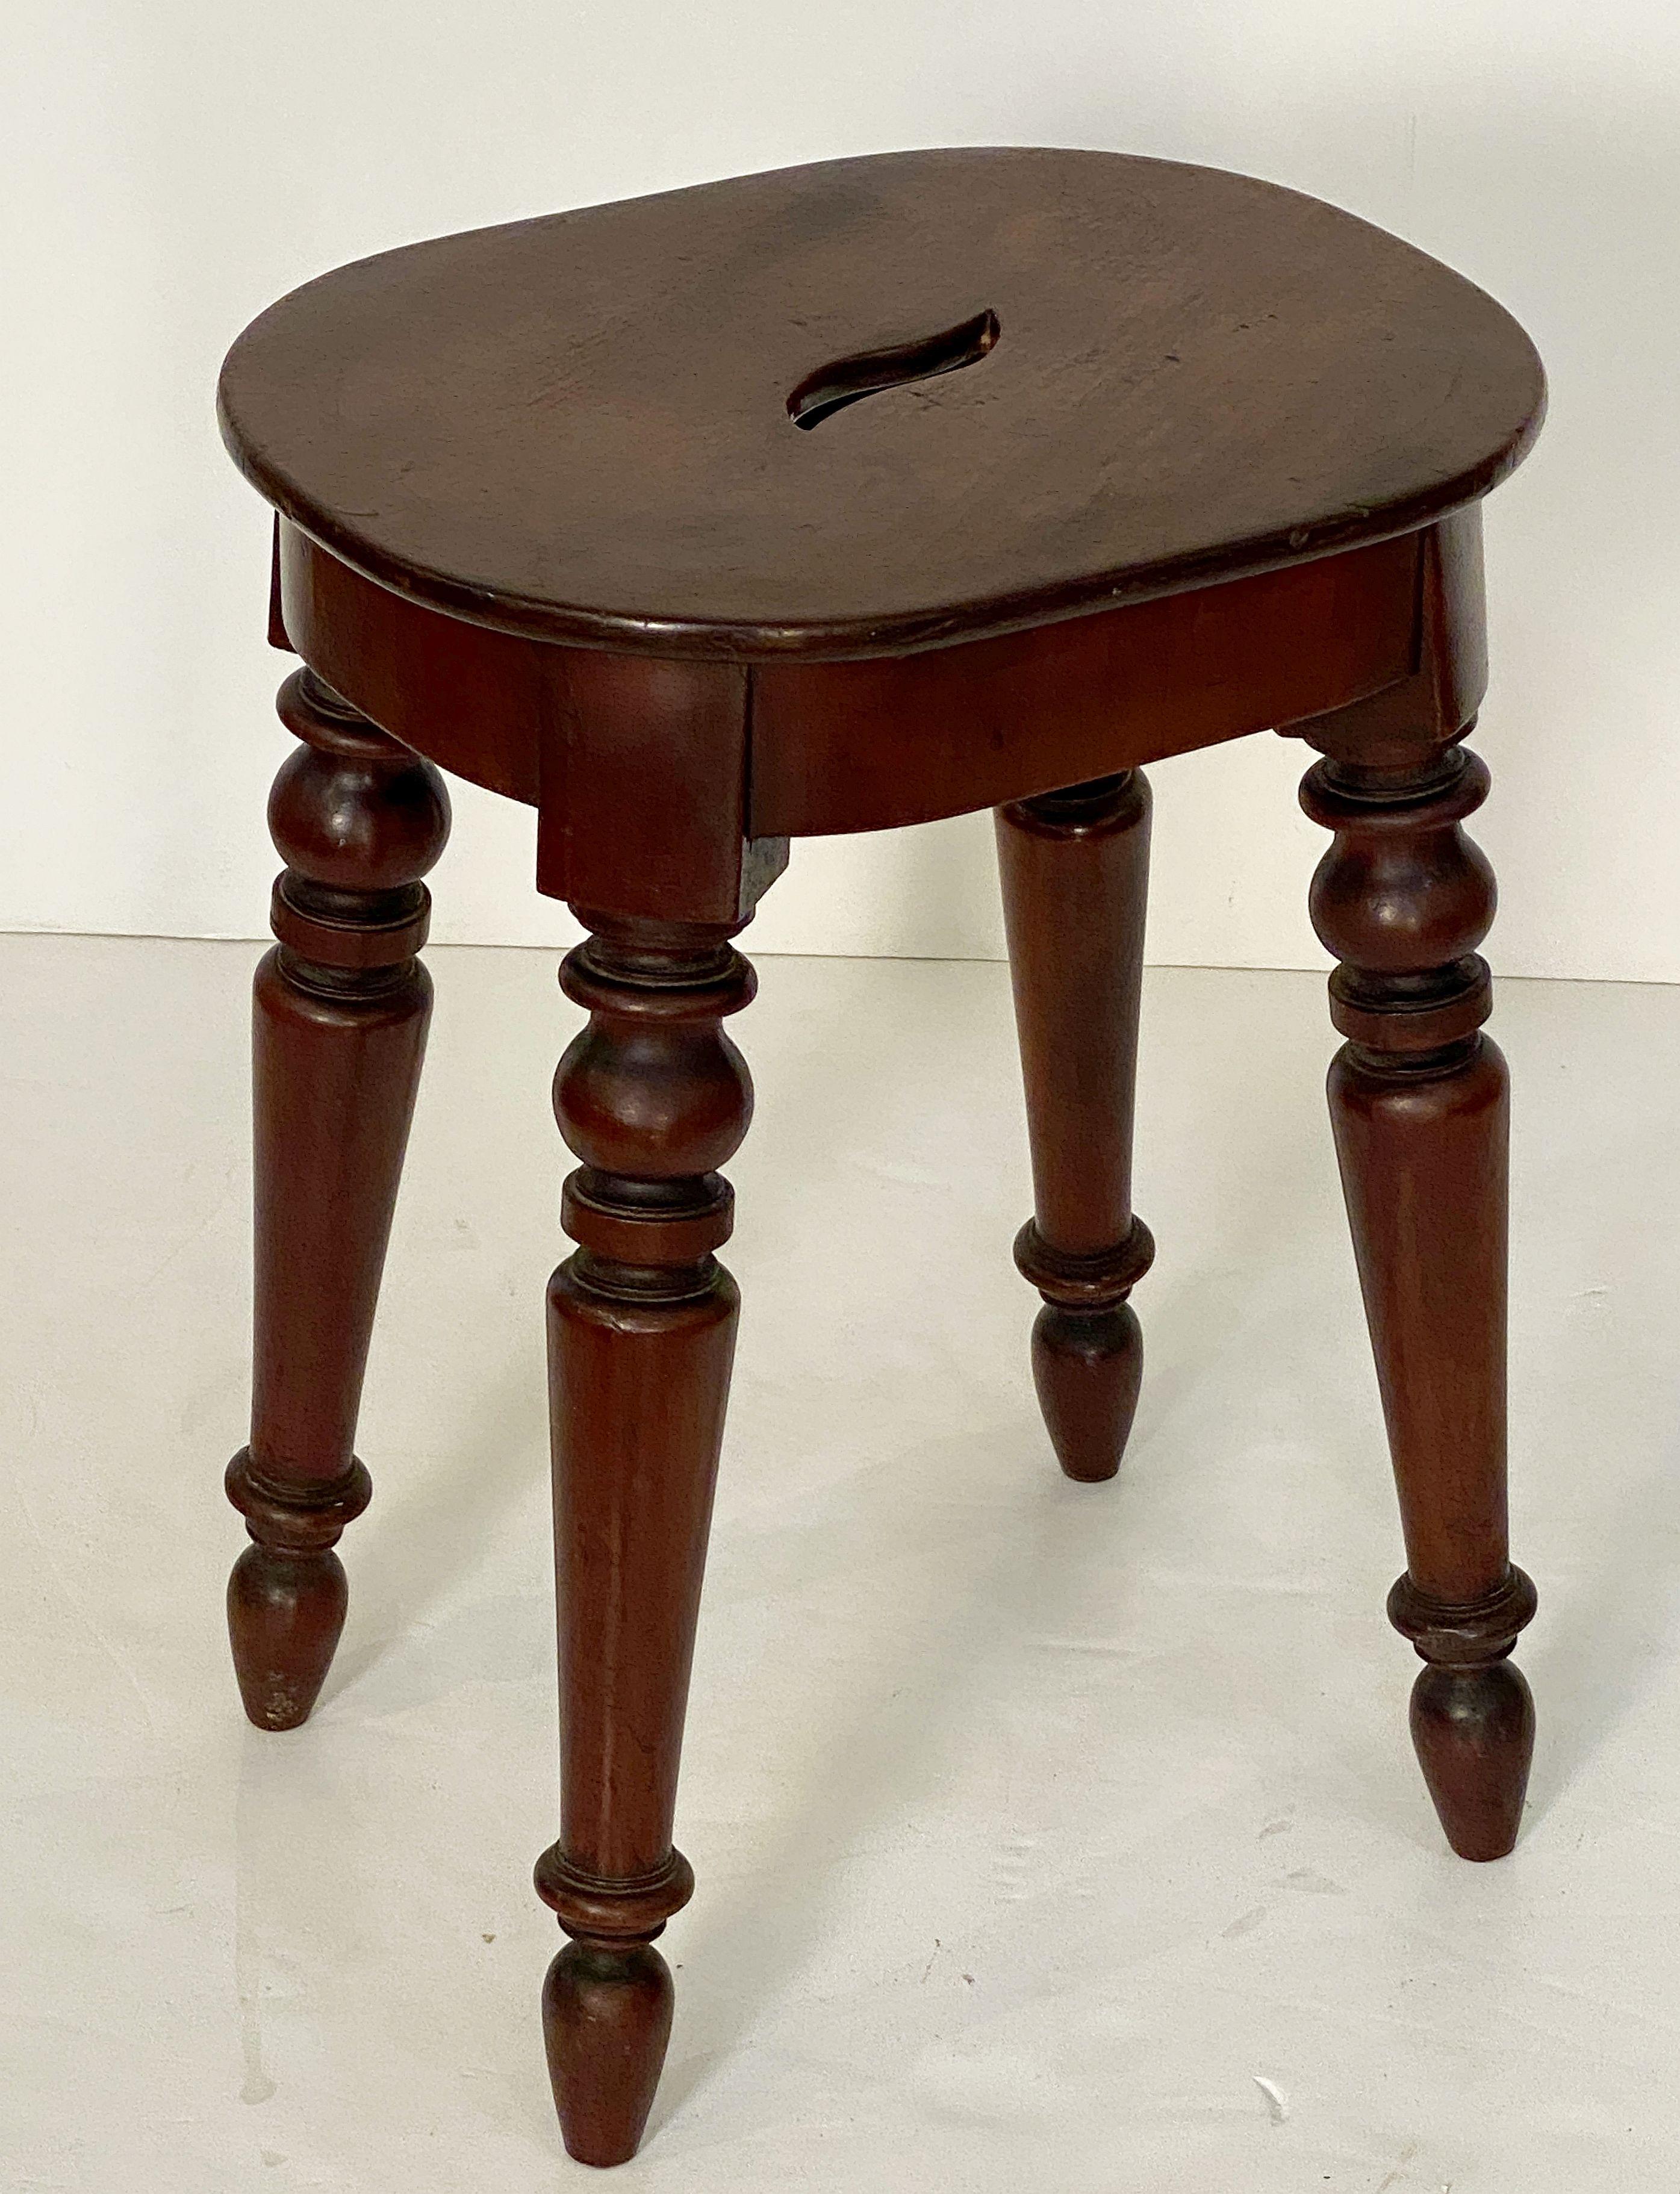 A fine English seating stool or bench of well patinated mahogany from the William IV period, featuring an oval top with an ‘s’ shape handhold, set upon four turned legs.